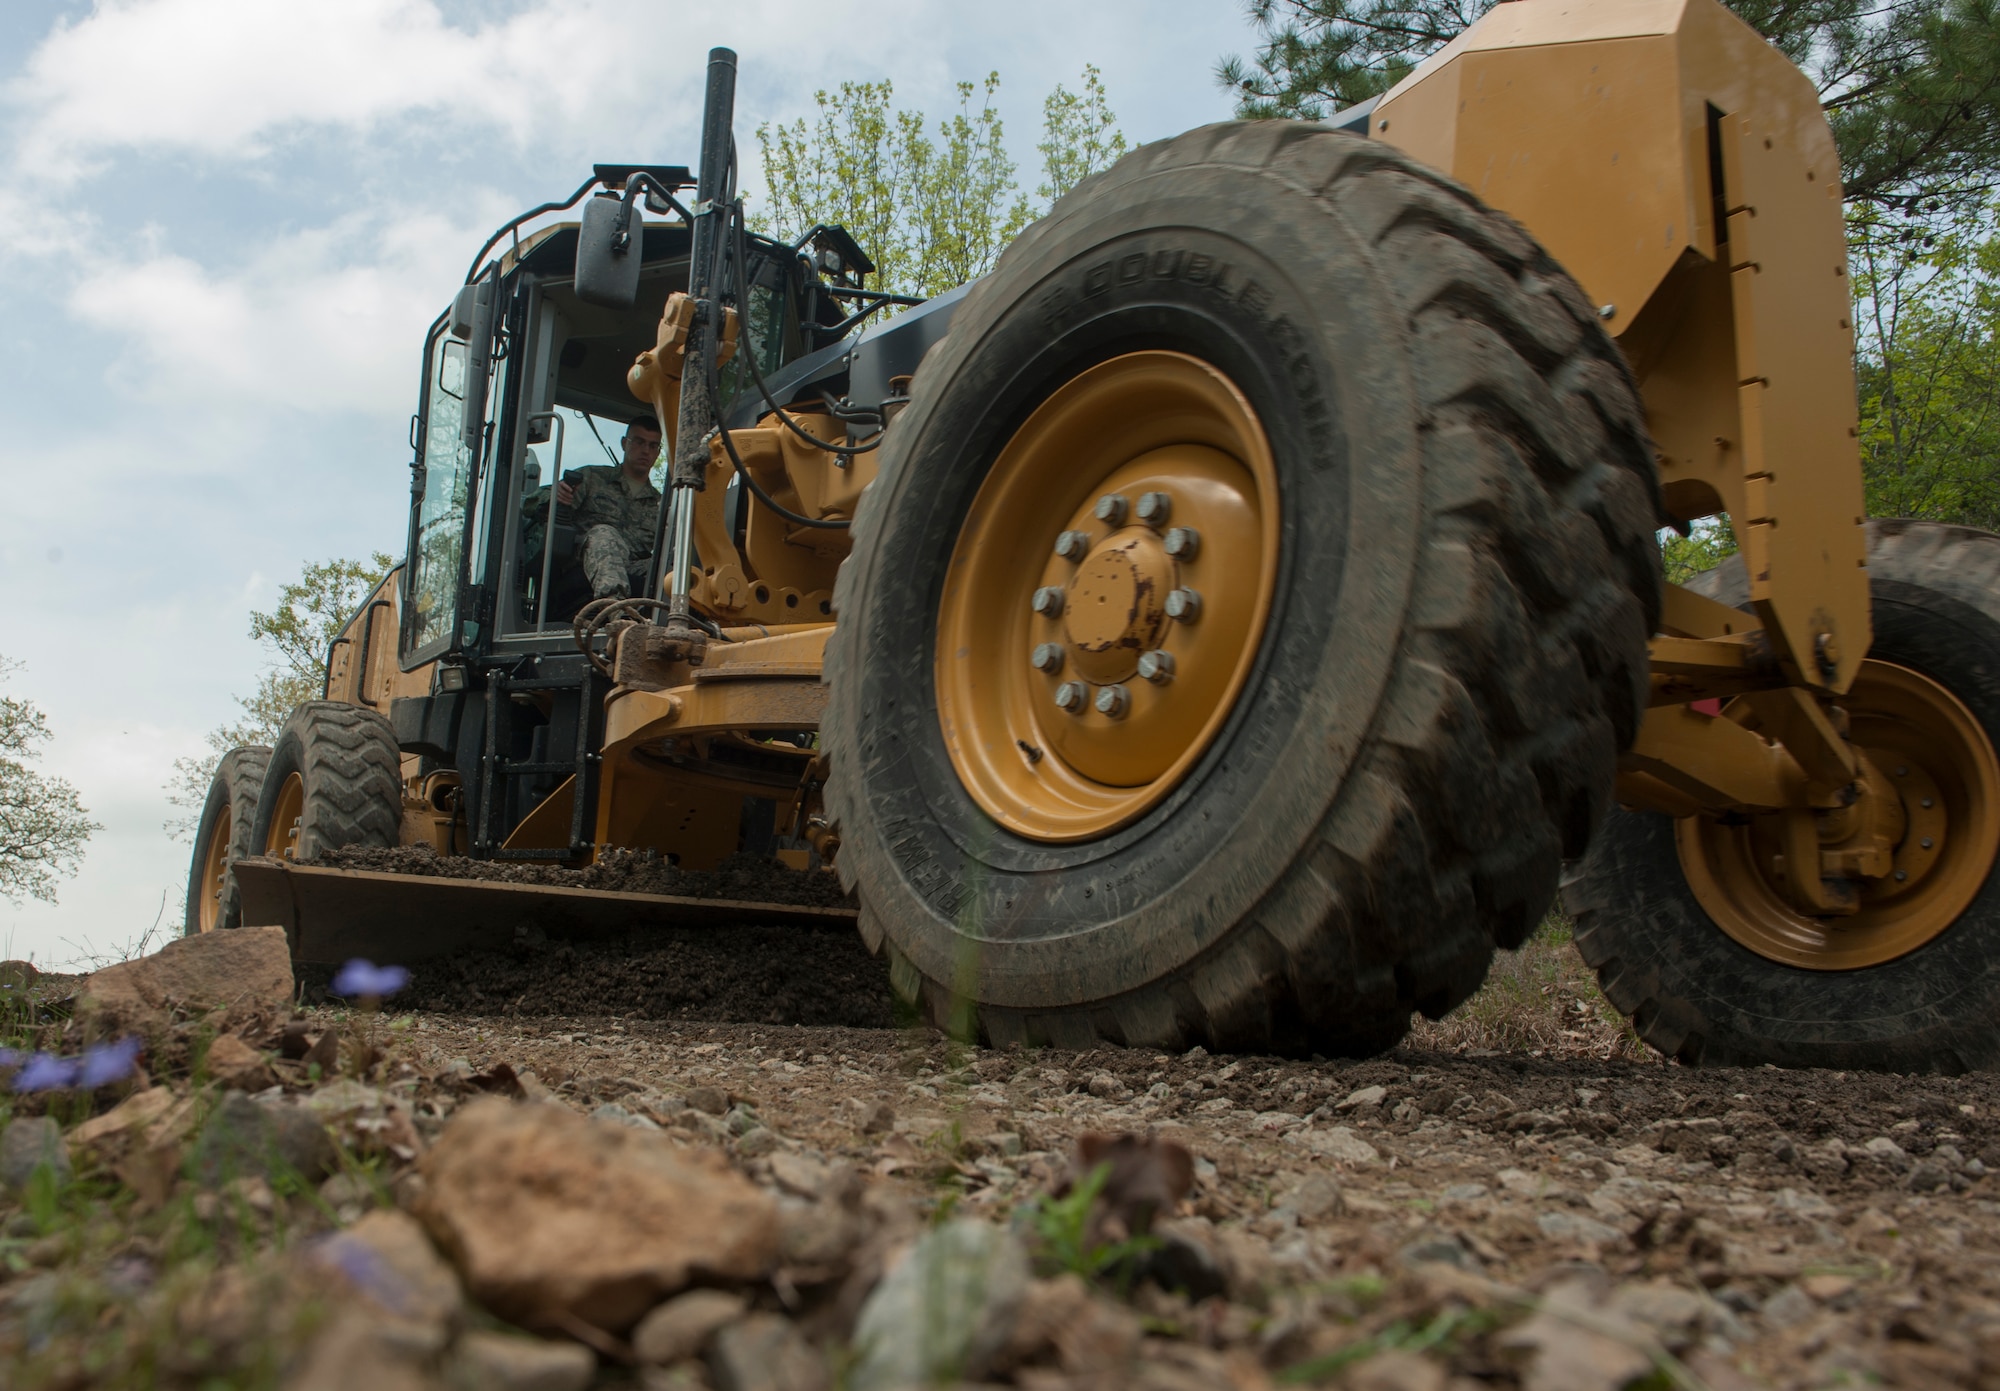 Senior Airman Stephen DenBleyker, a 19th Civil Engineer Squadron pavements and construction equipment journeyman, uses a grader to level out an unpaved road April 8, 2015, at Little Rock Air Force Base, Ark. One of their many responibilities is to maintain more than 25 miles of roads located on base. (U.S. Air Force photo by Airman 1st Class Scott Poe)